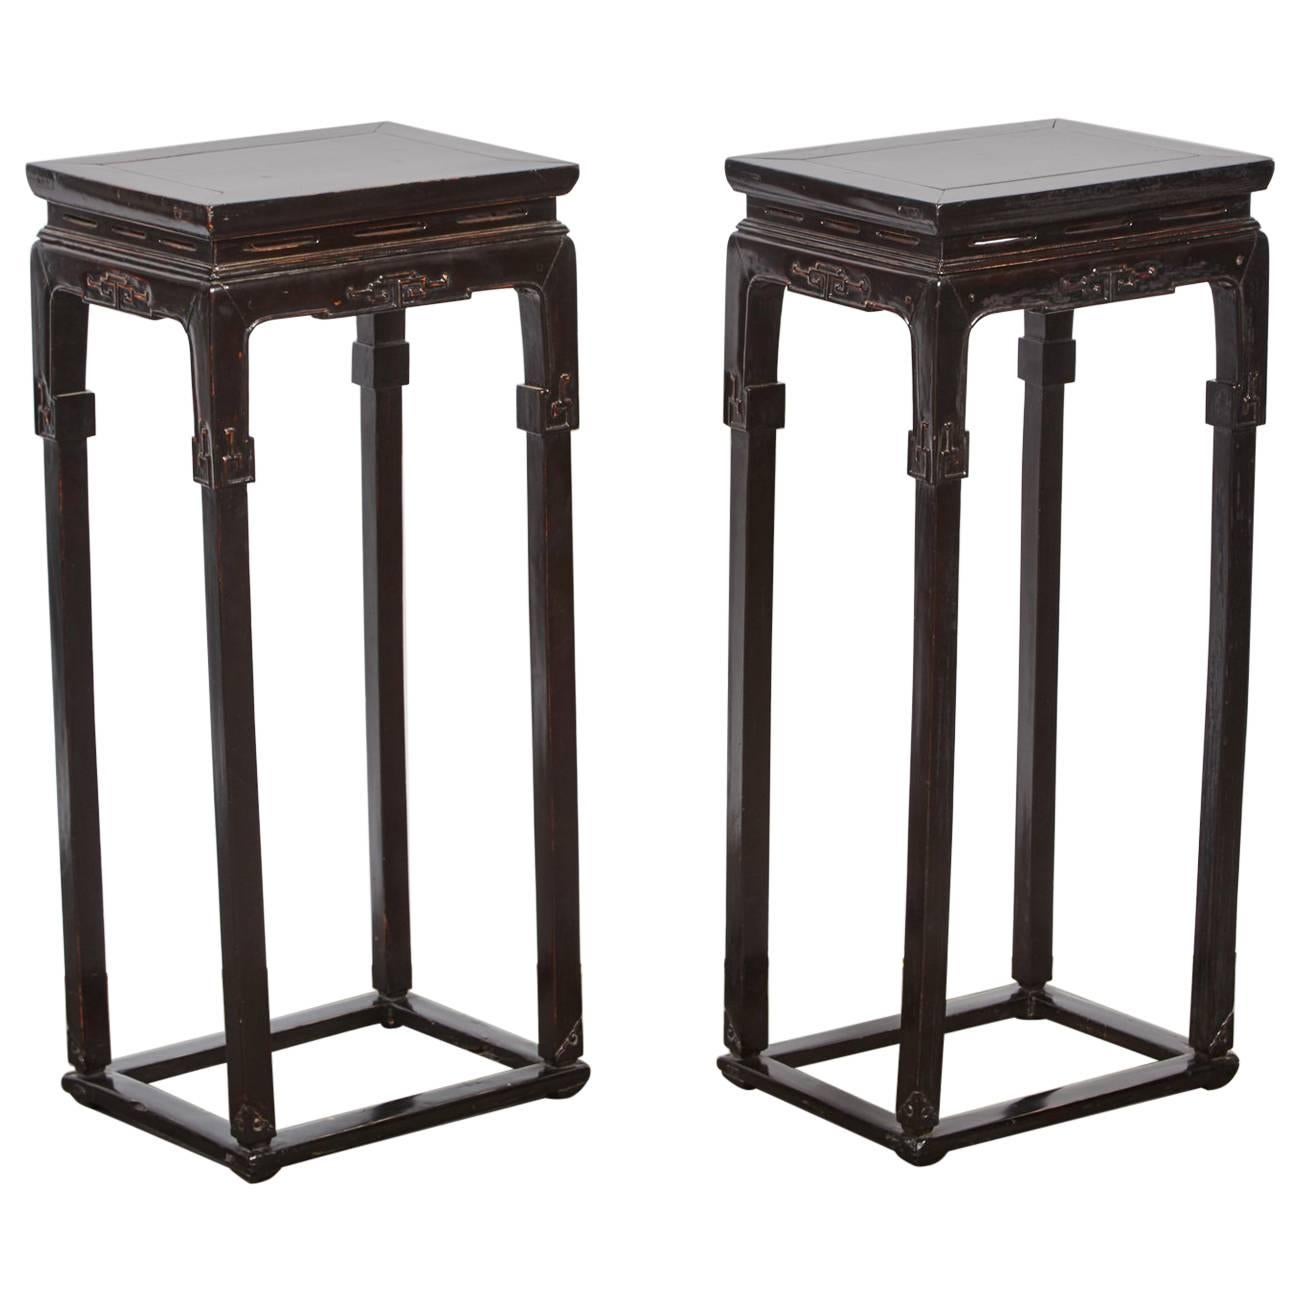 18th Century Chinese Pair of Tall Thin Lacquer Tea Tables